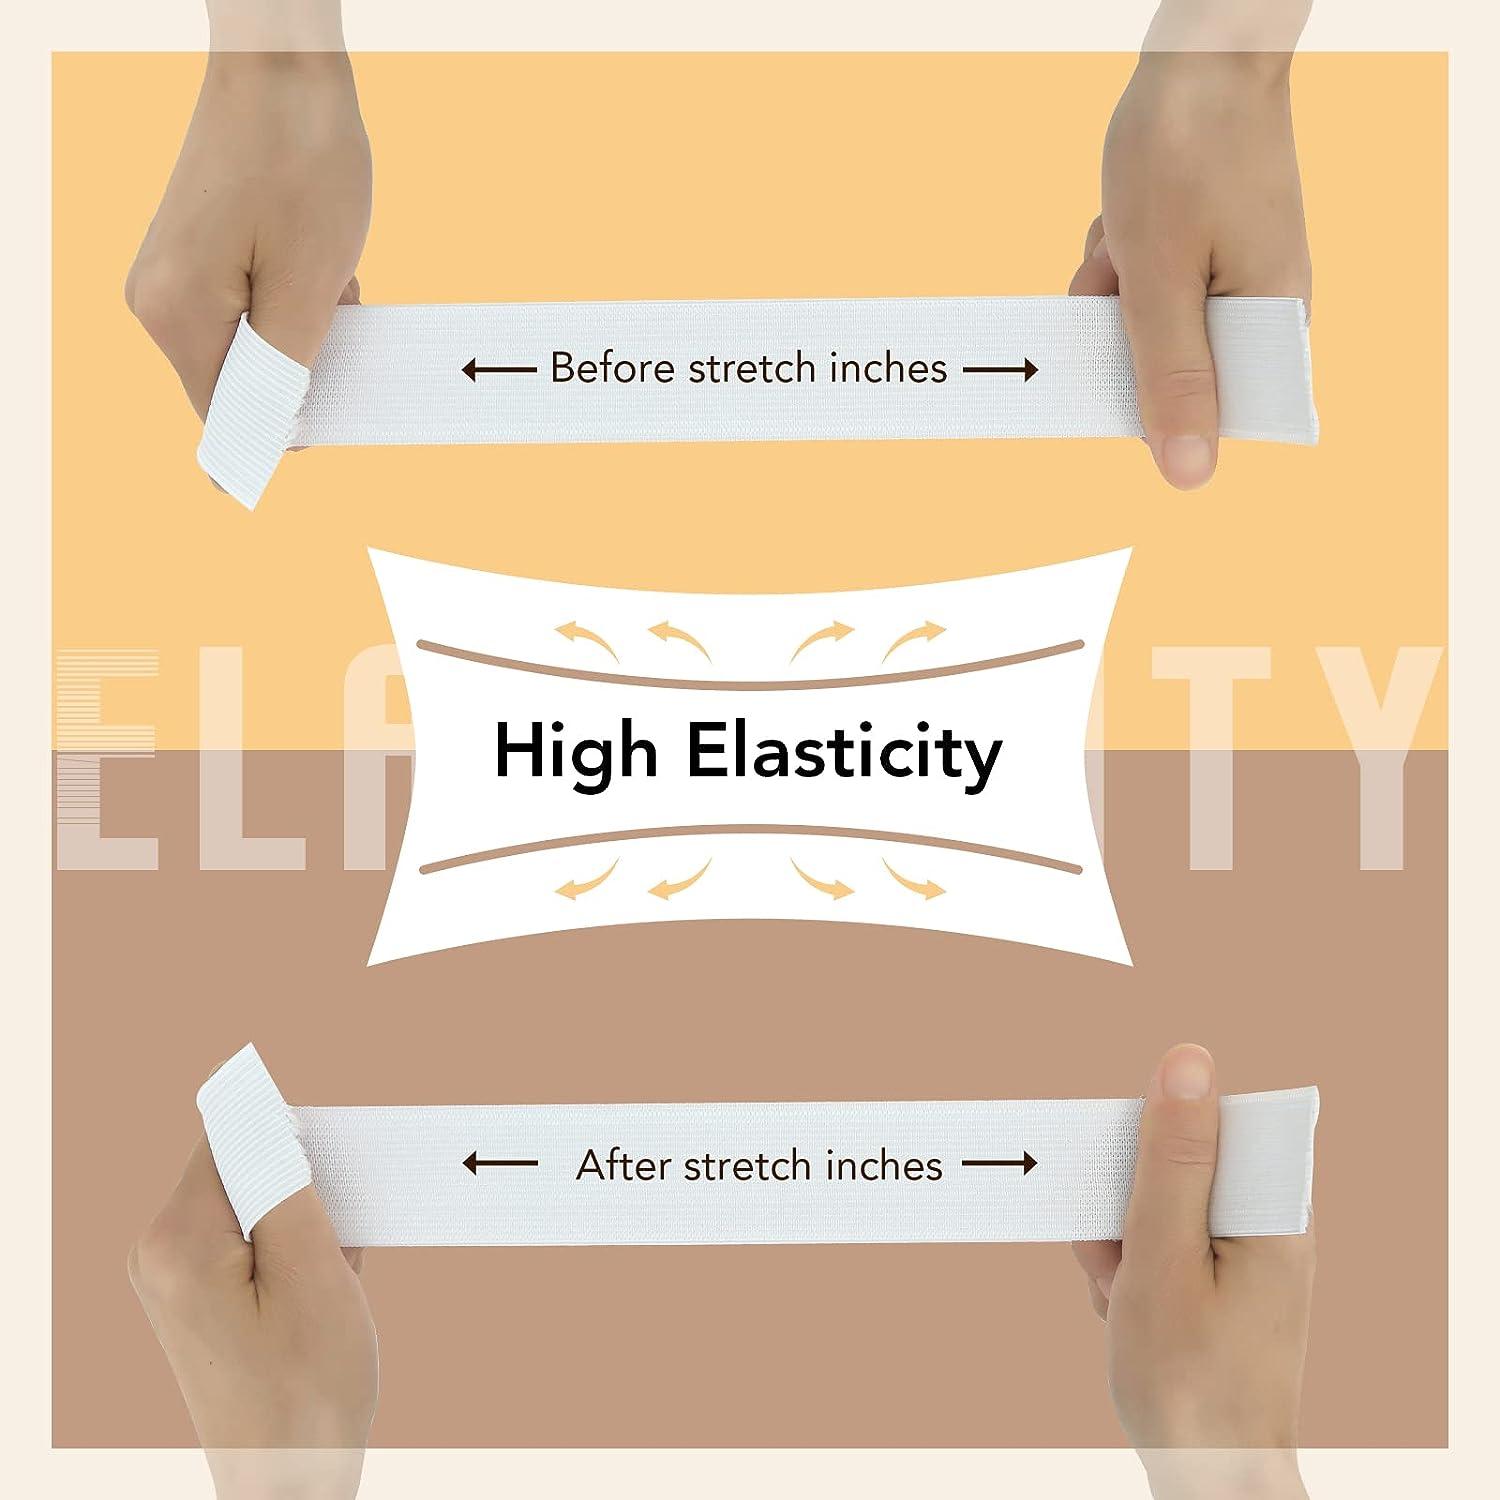 Elastic Bands for Sewing 1 Inch 11 Yards White Elastic Spool Knit Elastic  Spool High Elasticity for Waistband Pants Dress Swimwear Belt or Crafts DIY  (White-1 in * 11 Yard) White 1 Inch * 11 Yard